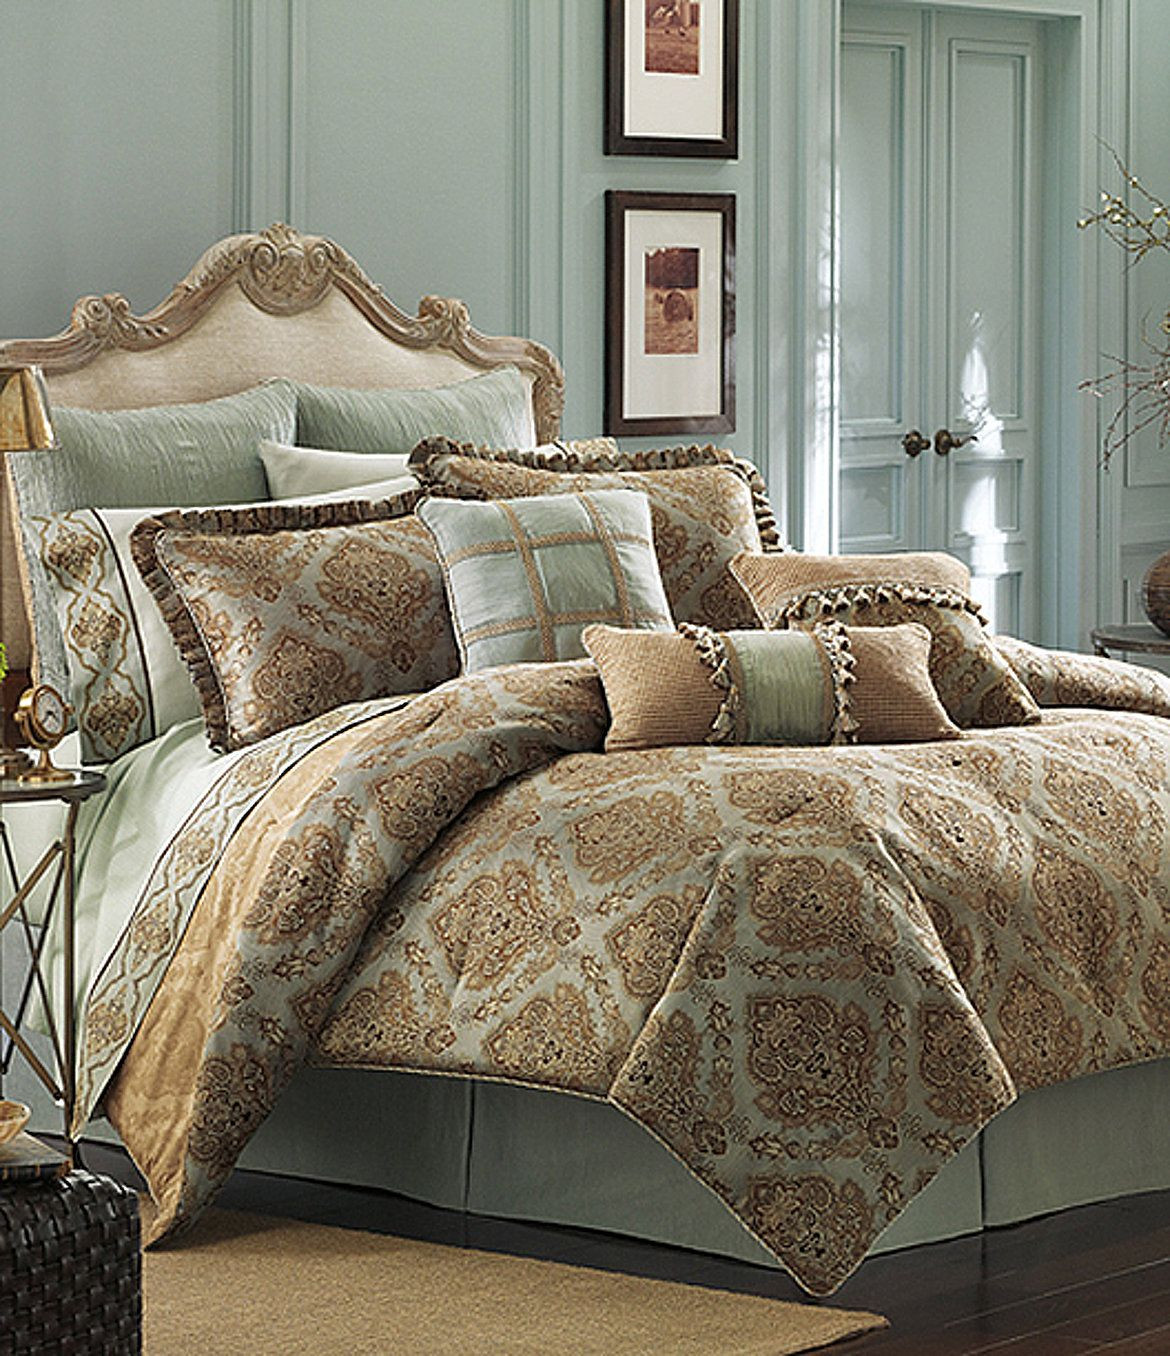 Master Bedroom Bedding Sets
 Master Bedroom Croscill Laviano bedding With images